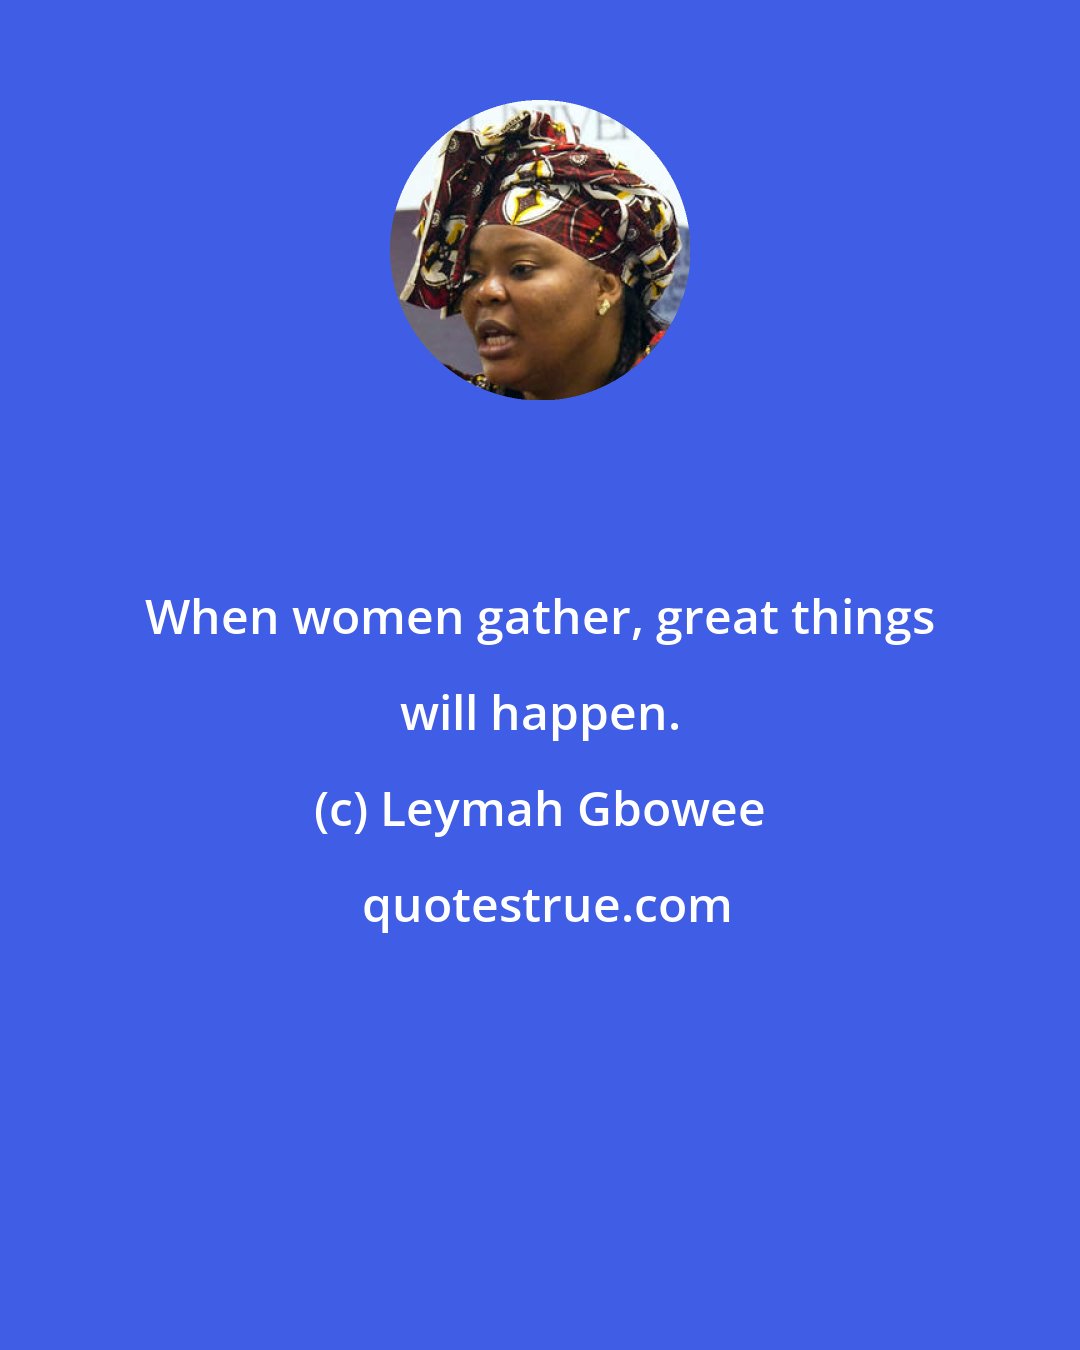 Leymah Gbowee: When women gather, great things will happen.